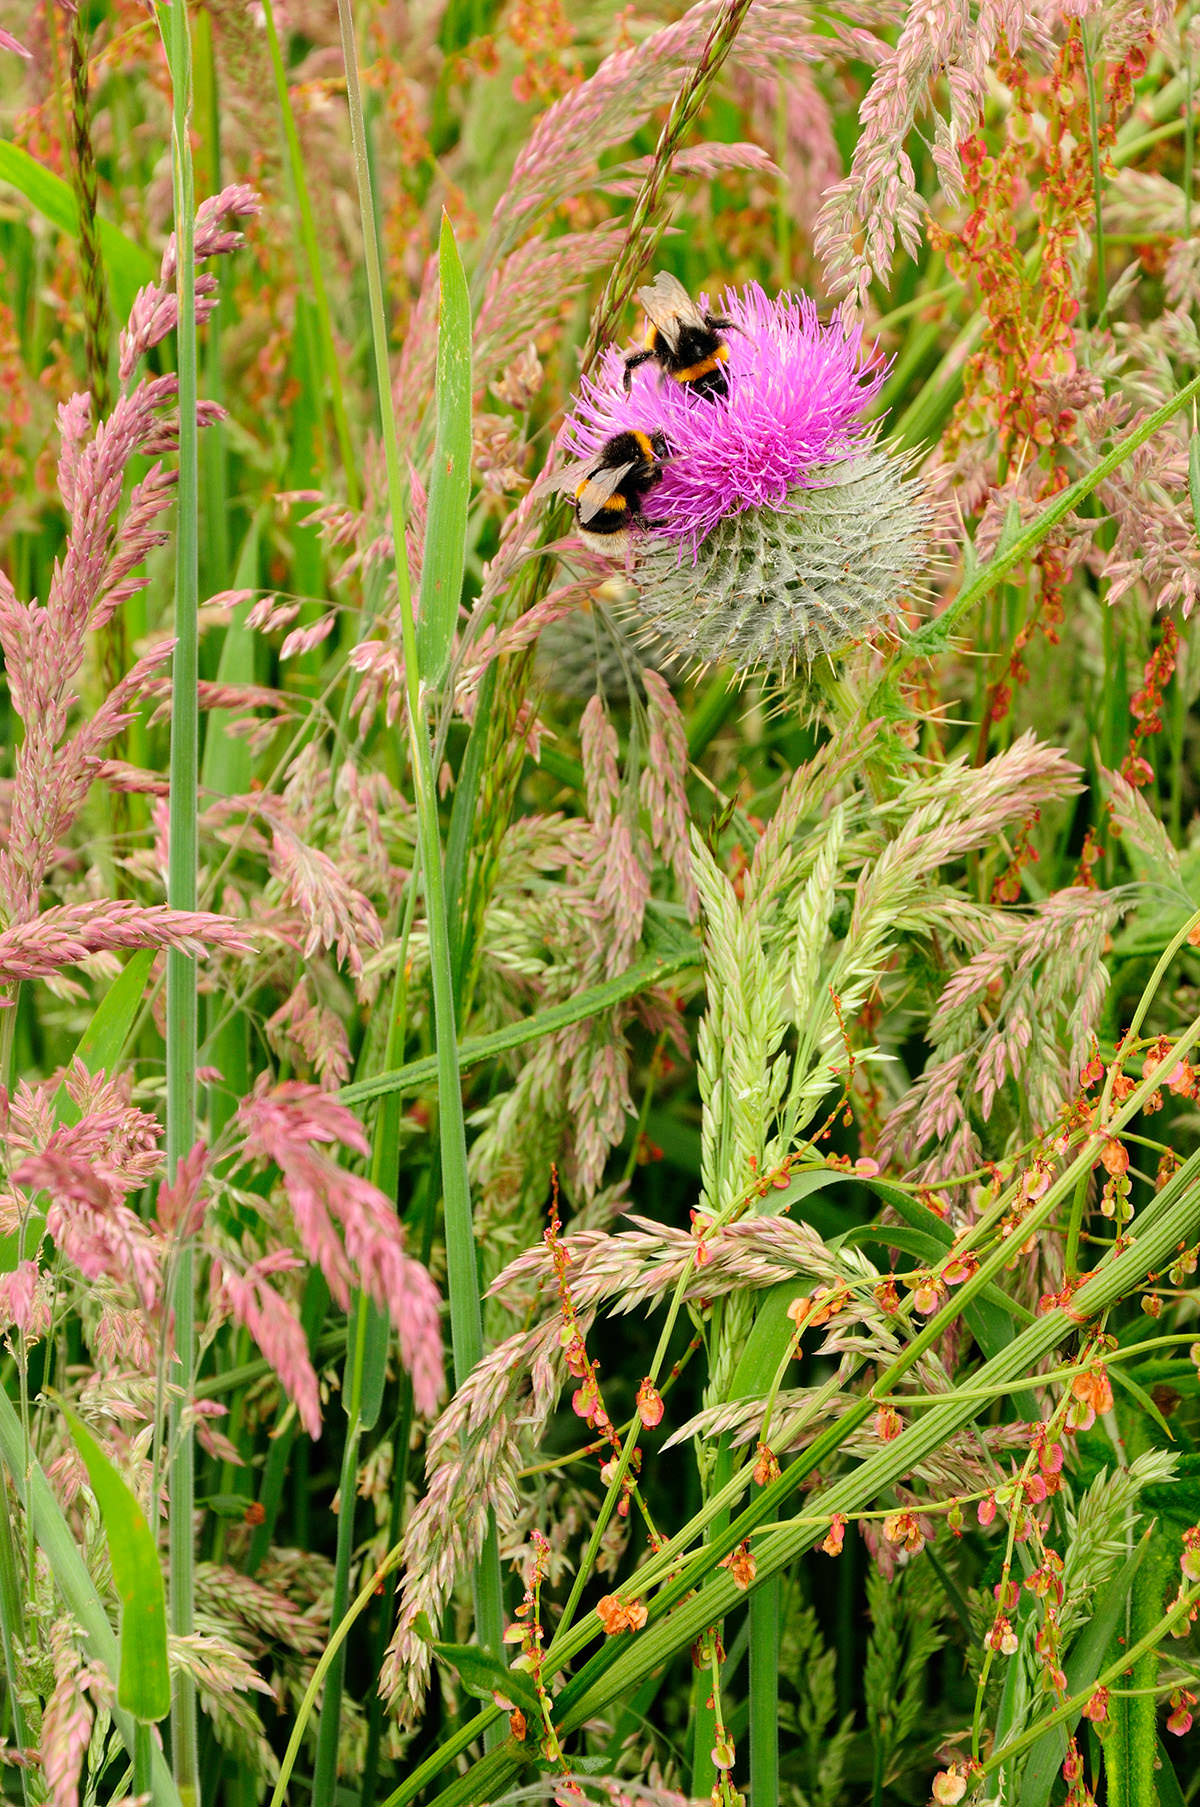 Two bumblebees on the purple jagged head of a Scottish thistle, growing among long grass with green and brown tones